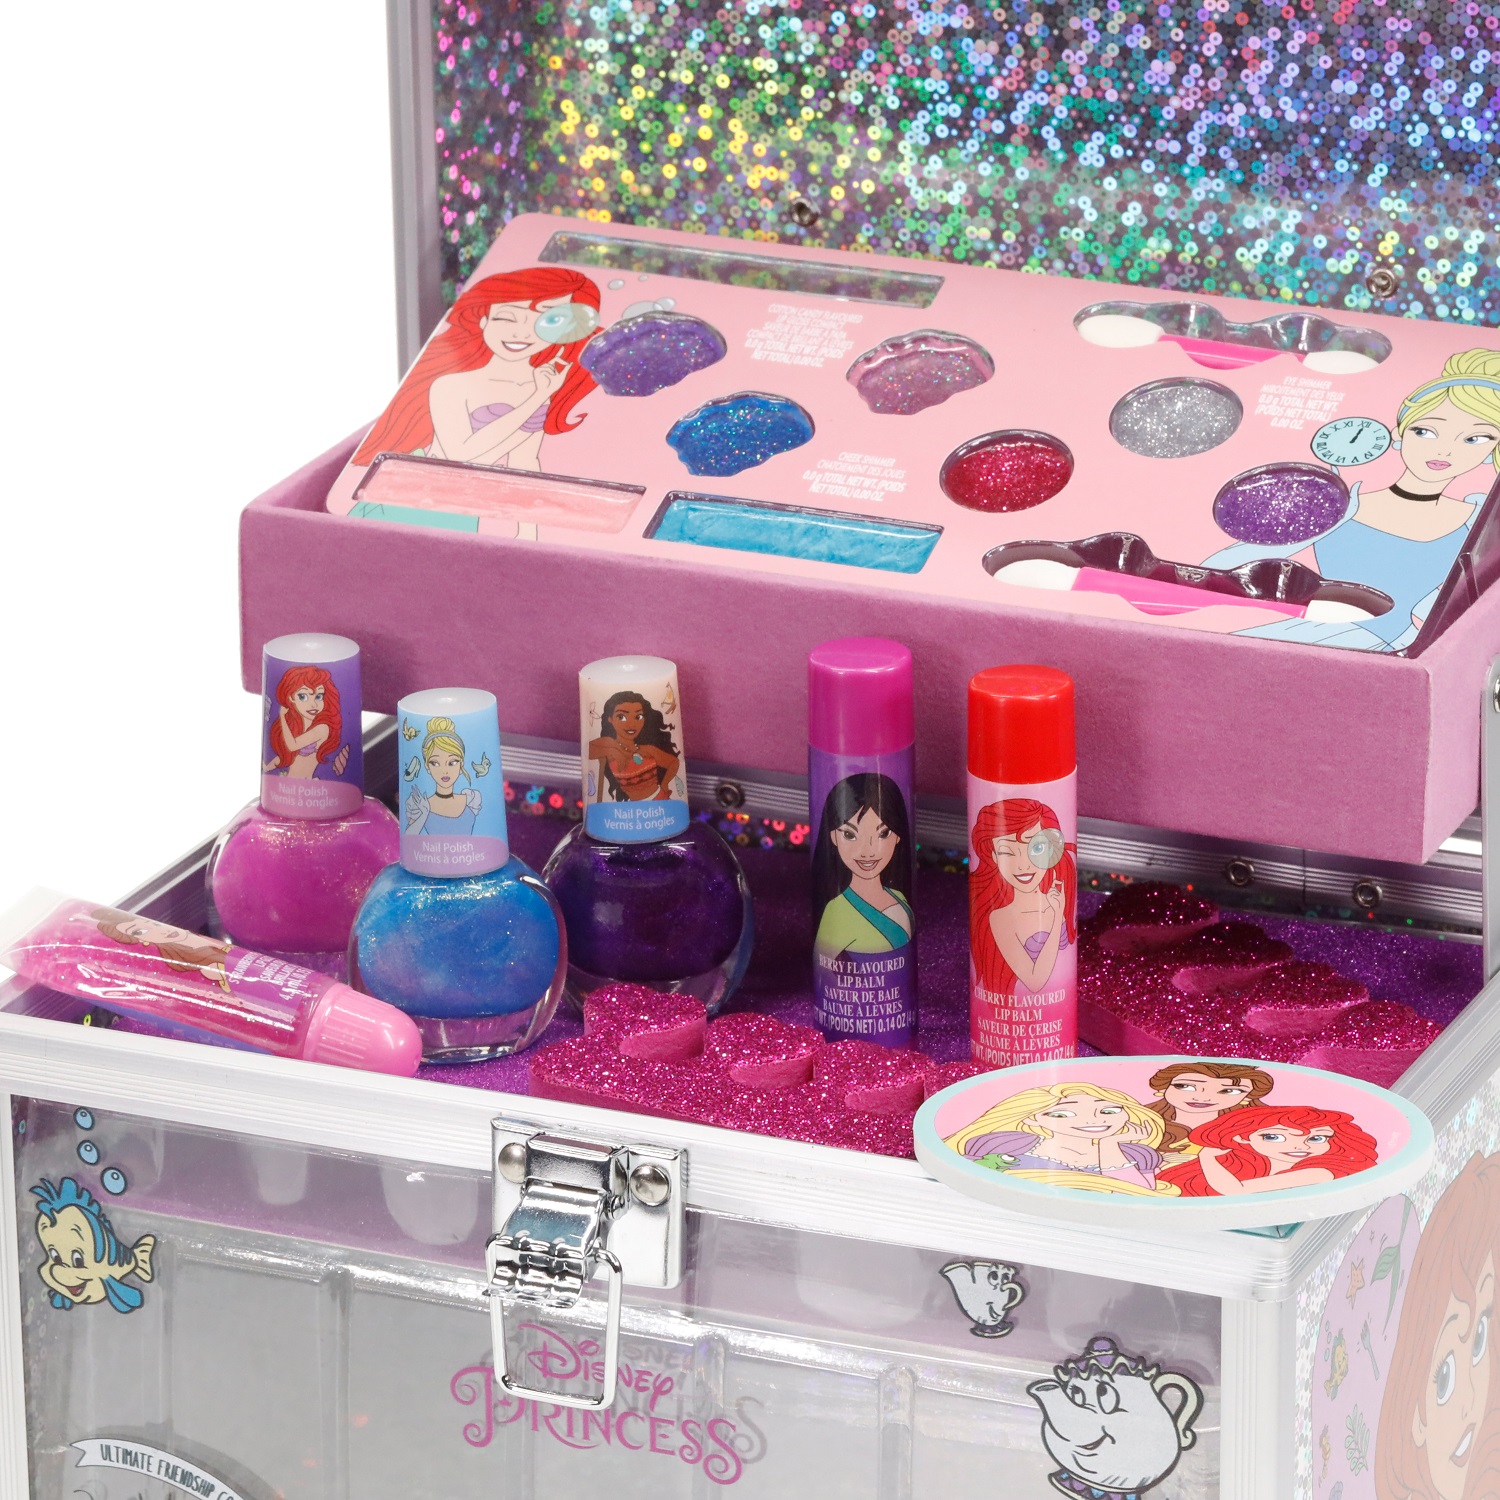 Disney Princess Train Case Pretend Play Cosmetic Set- Kids Beauty, Toy, Gift for Girls, Ages 3+ by Townley Girl - image 3 of 10